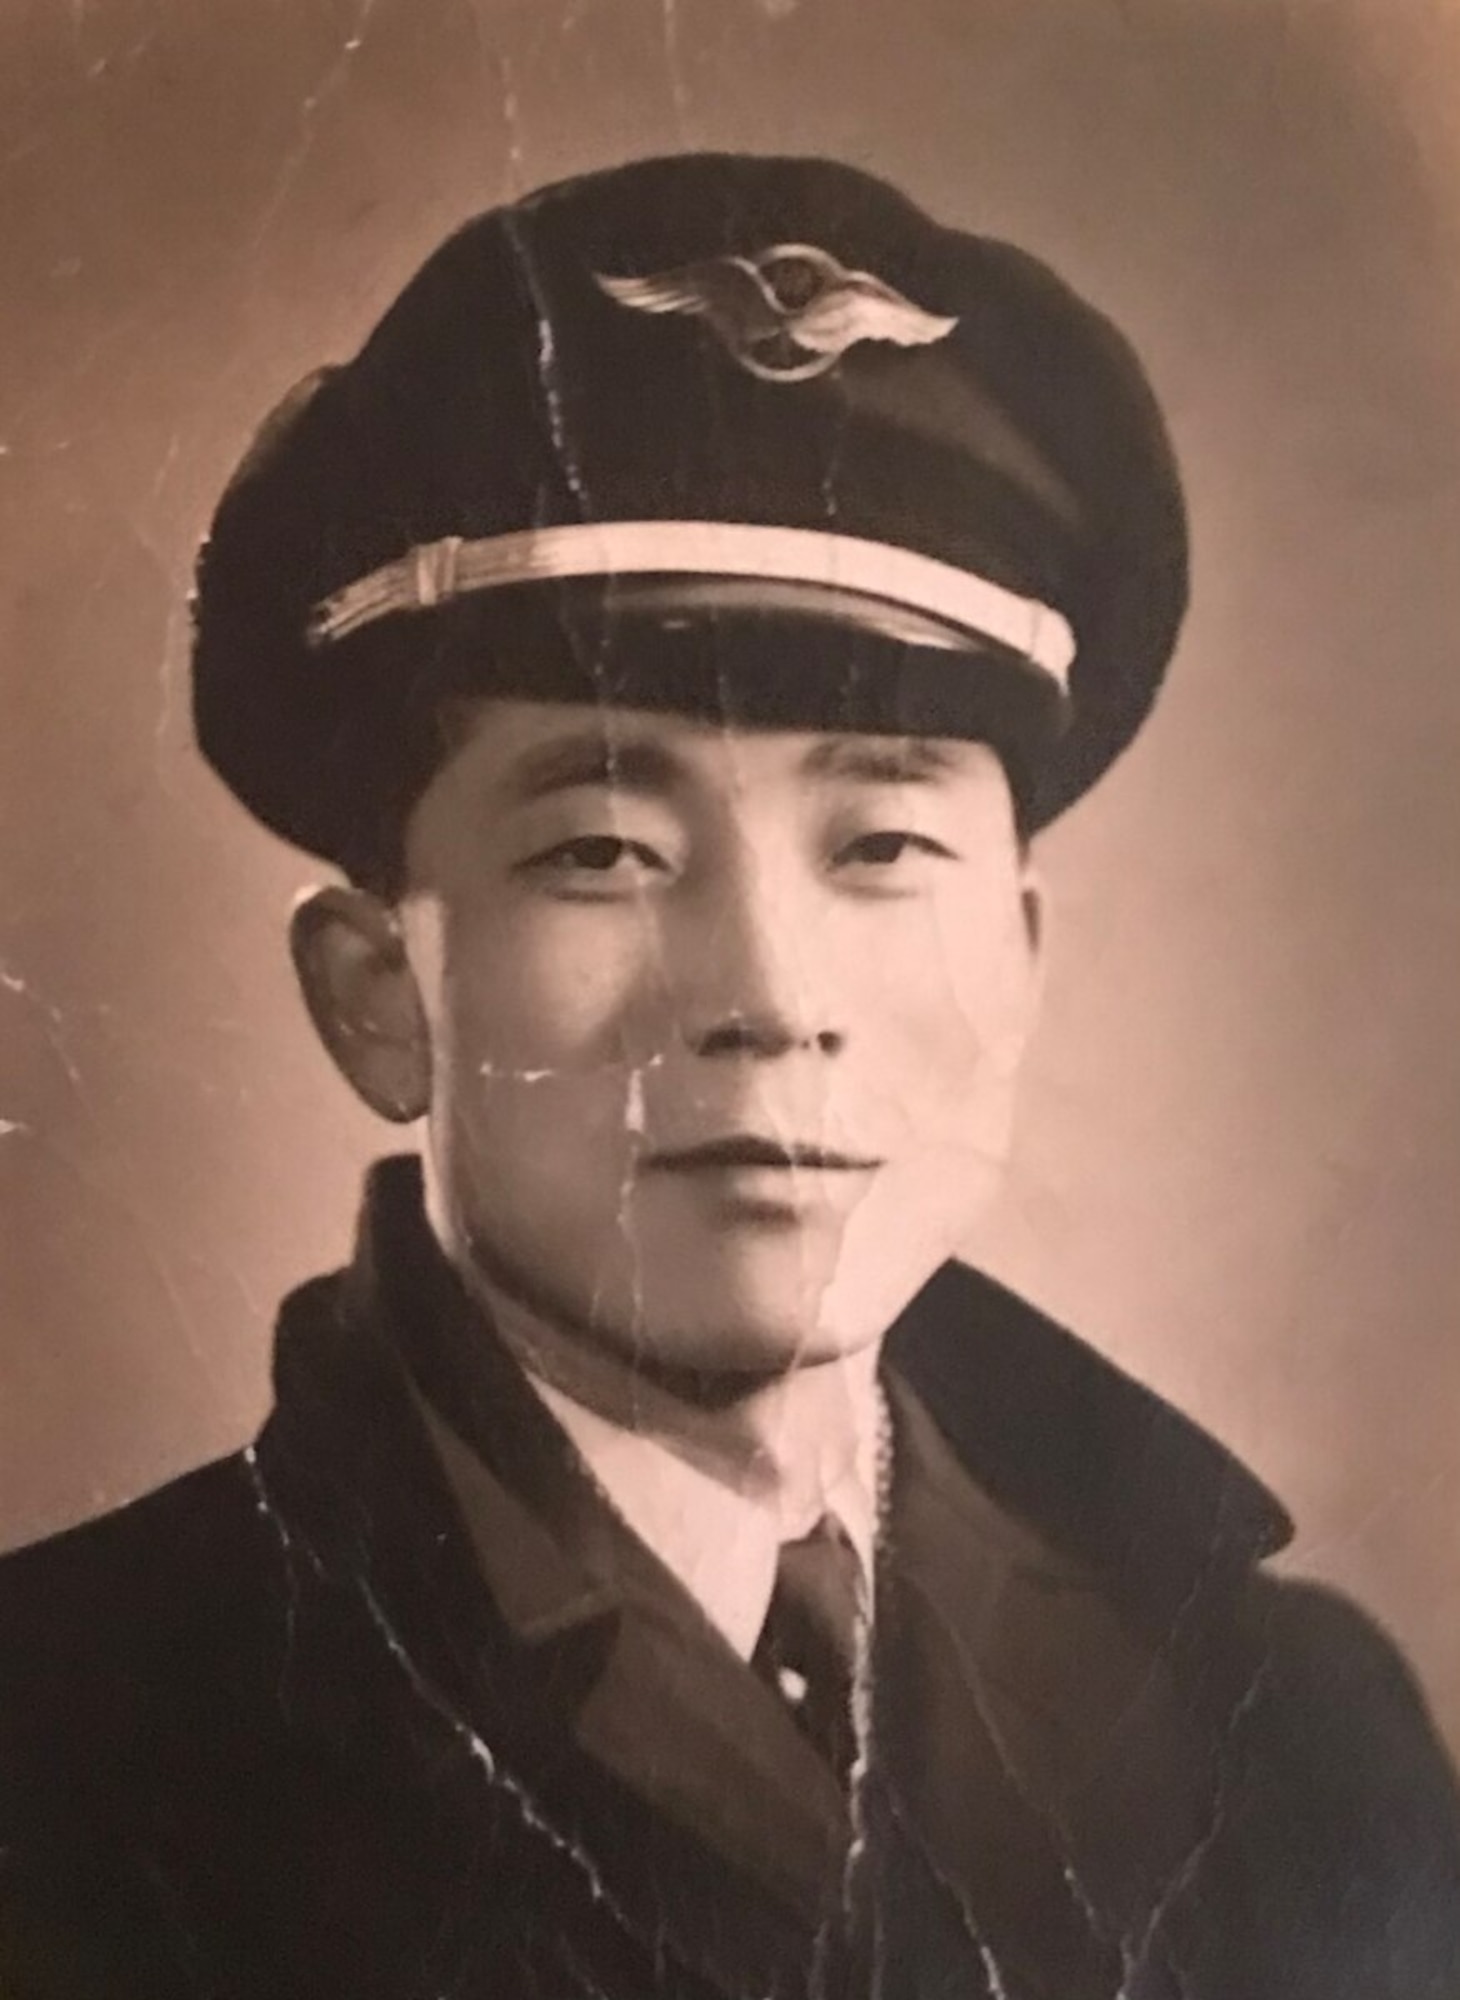 Republic of Korea Air Force senior noncommissioned officer 장용선 (Young Sun Chang) poses for an official photo in South Korea, 1952.